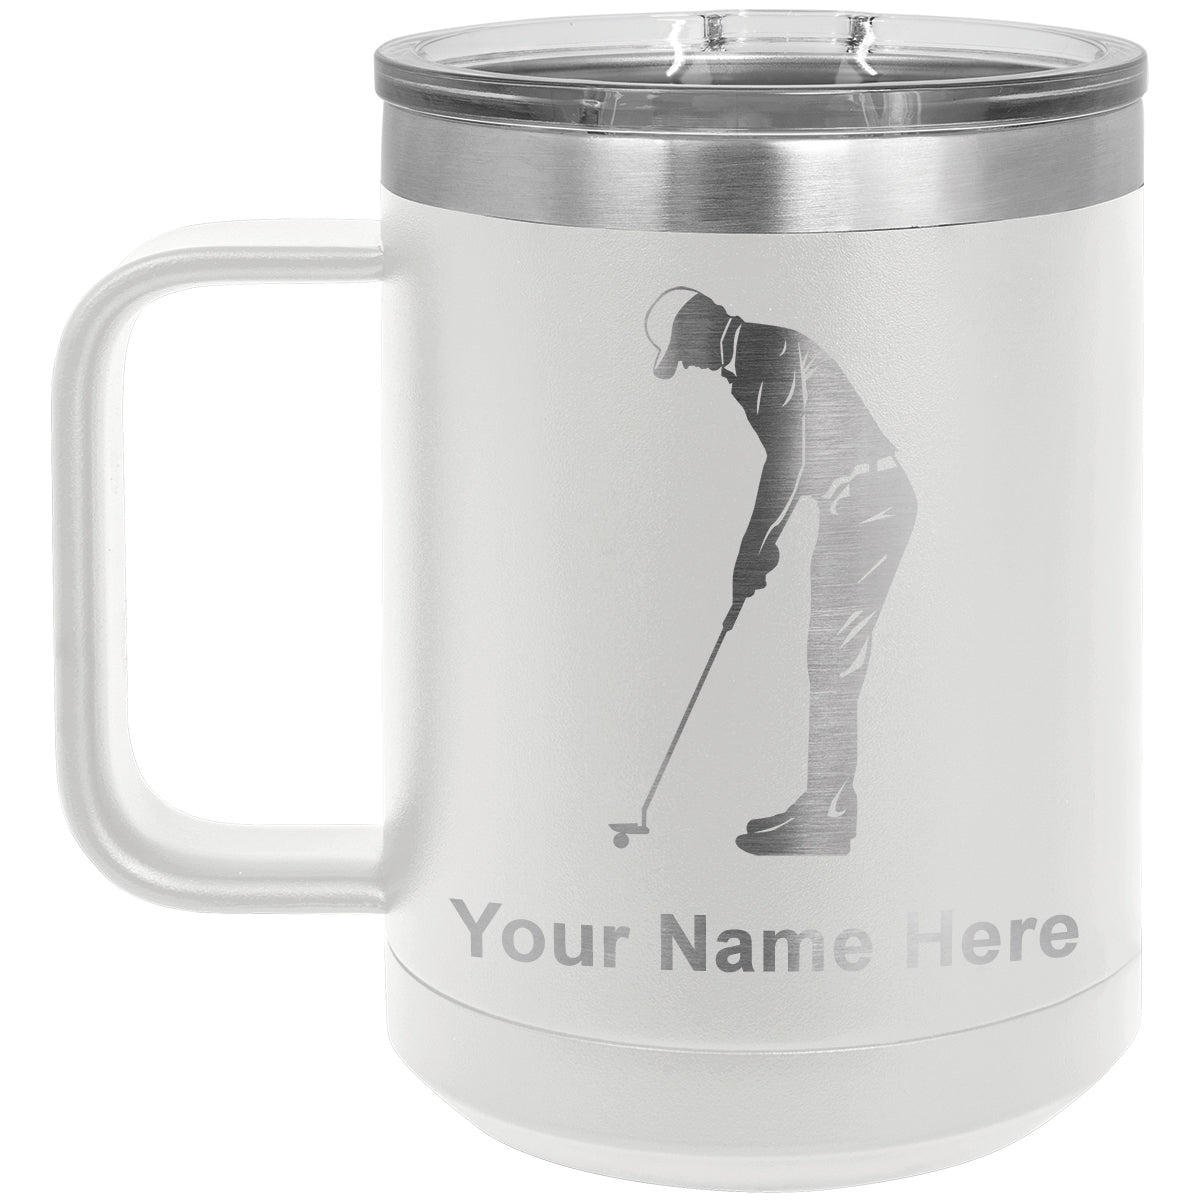 15oz Vacuum Insulated Coffee Mug, Golfer Putting, Personalized Engraving Included